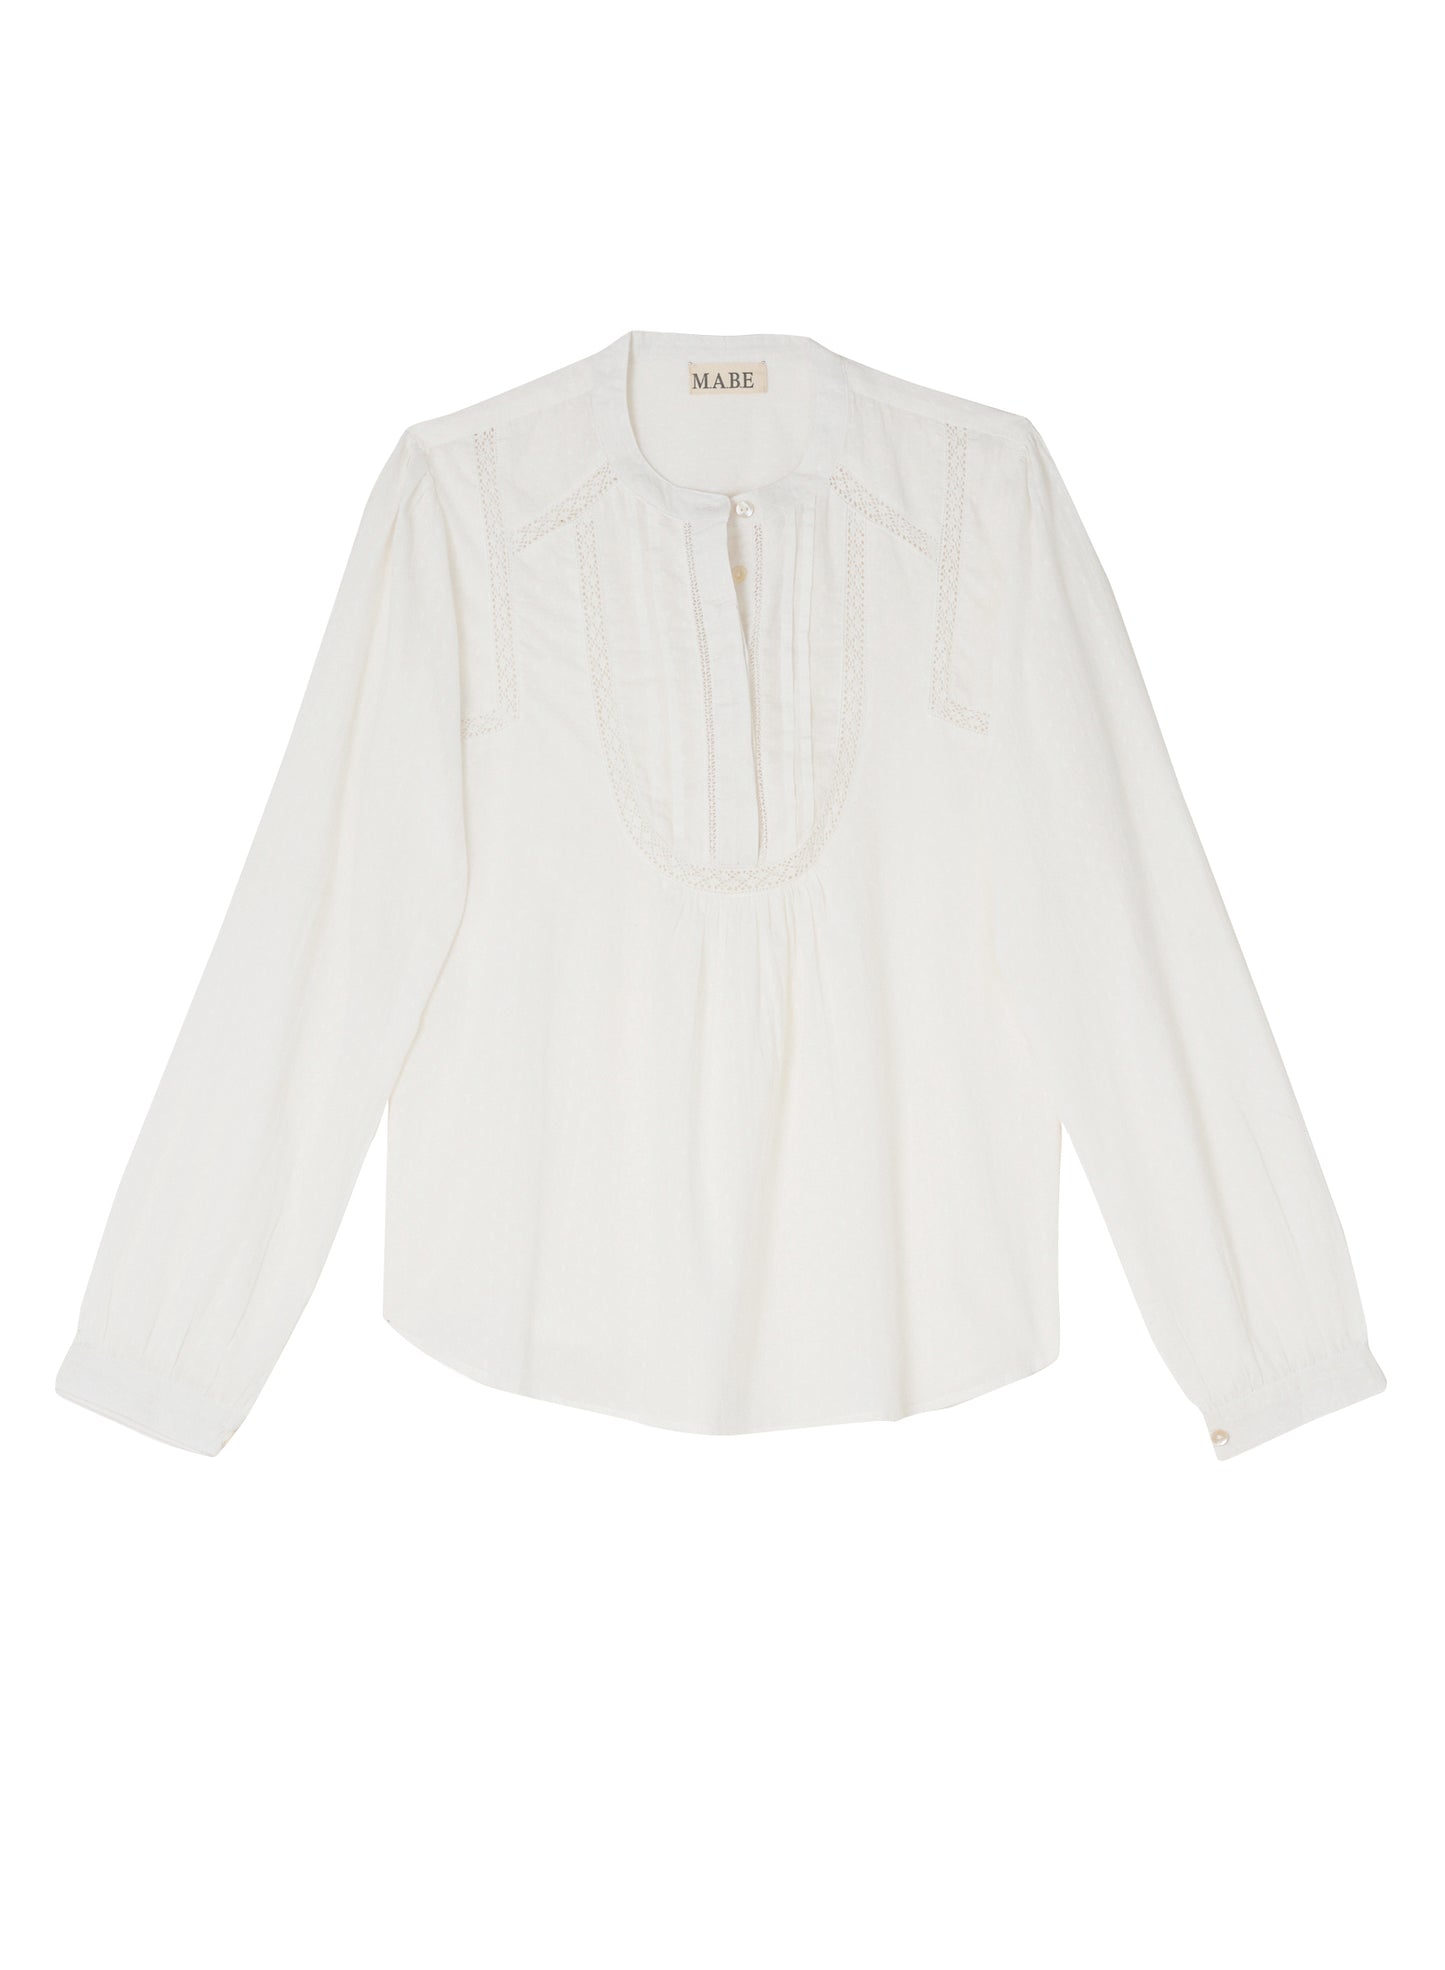 MABE | Adley top white - M540802